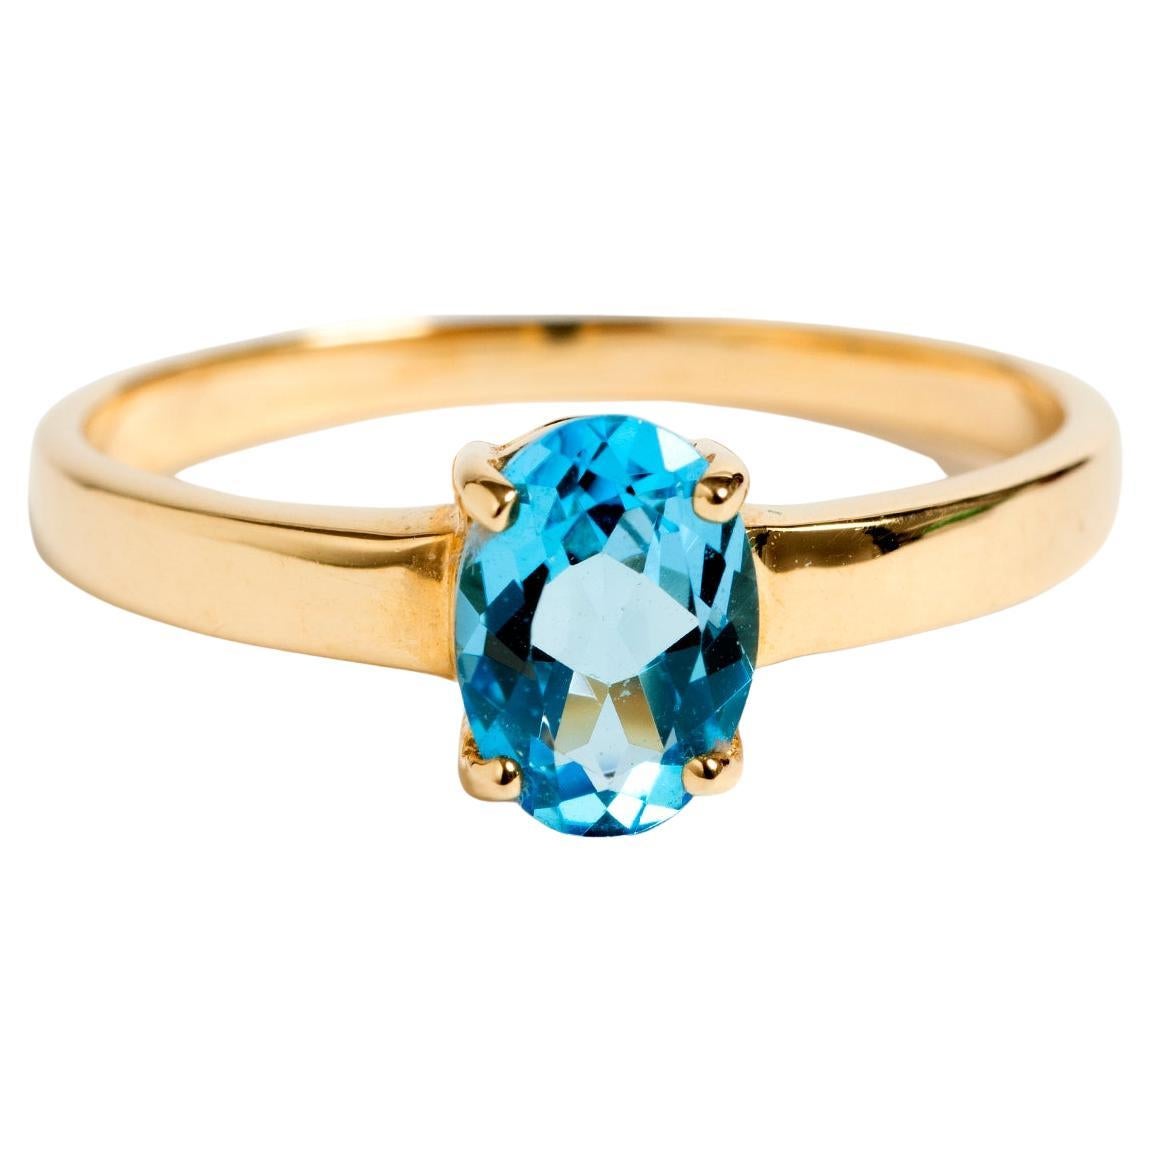 Pretty 9K Yellow Gold, Blue Topaz Ring, US Size 6 1/2. For Sale